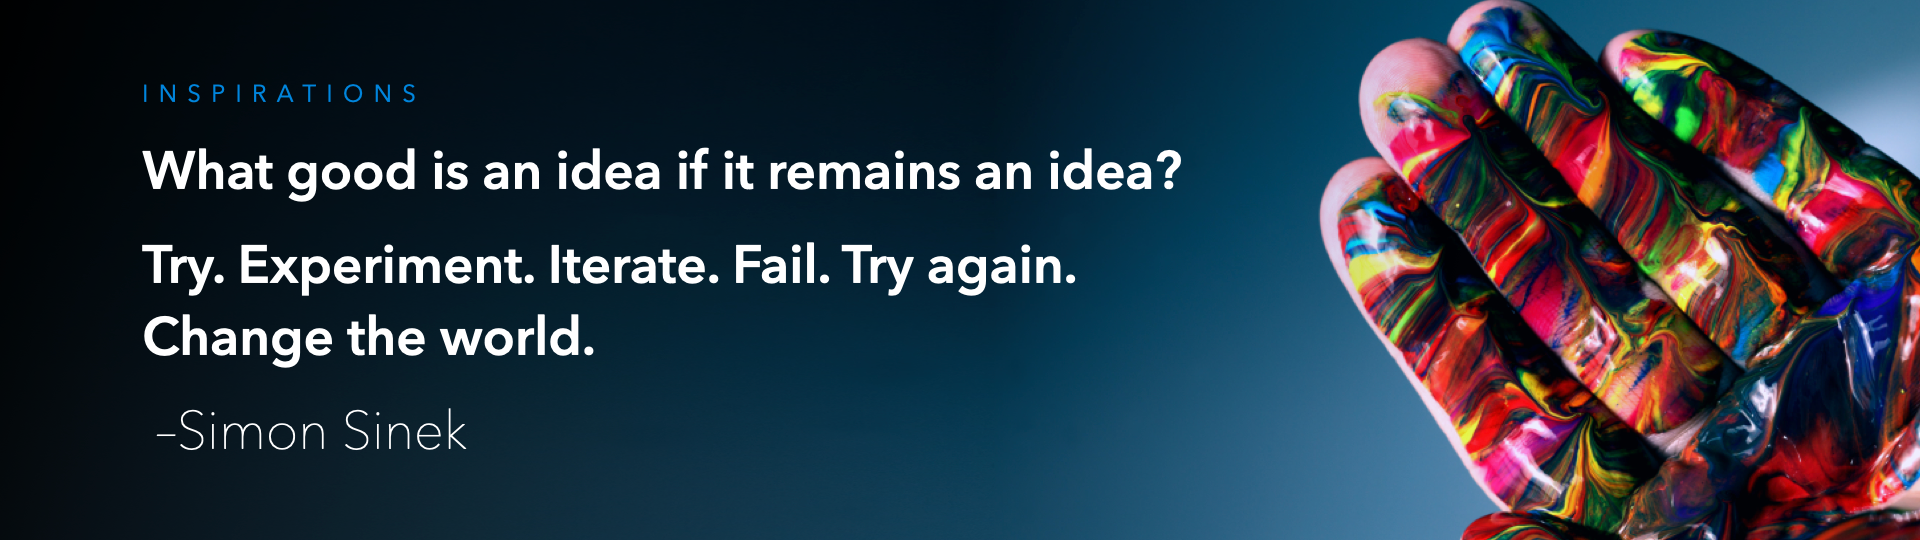 What good is an idea if it remains an idea? Try. Experiment. Iterate. Fail. Try again. Change the world. – Simon Sinek